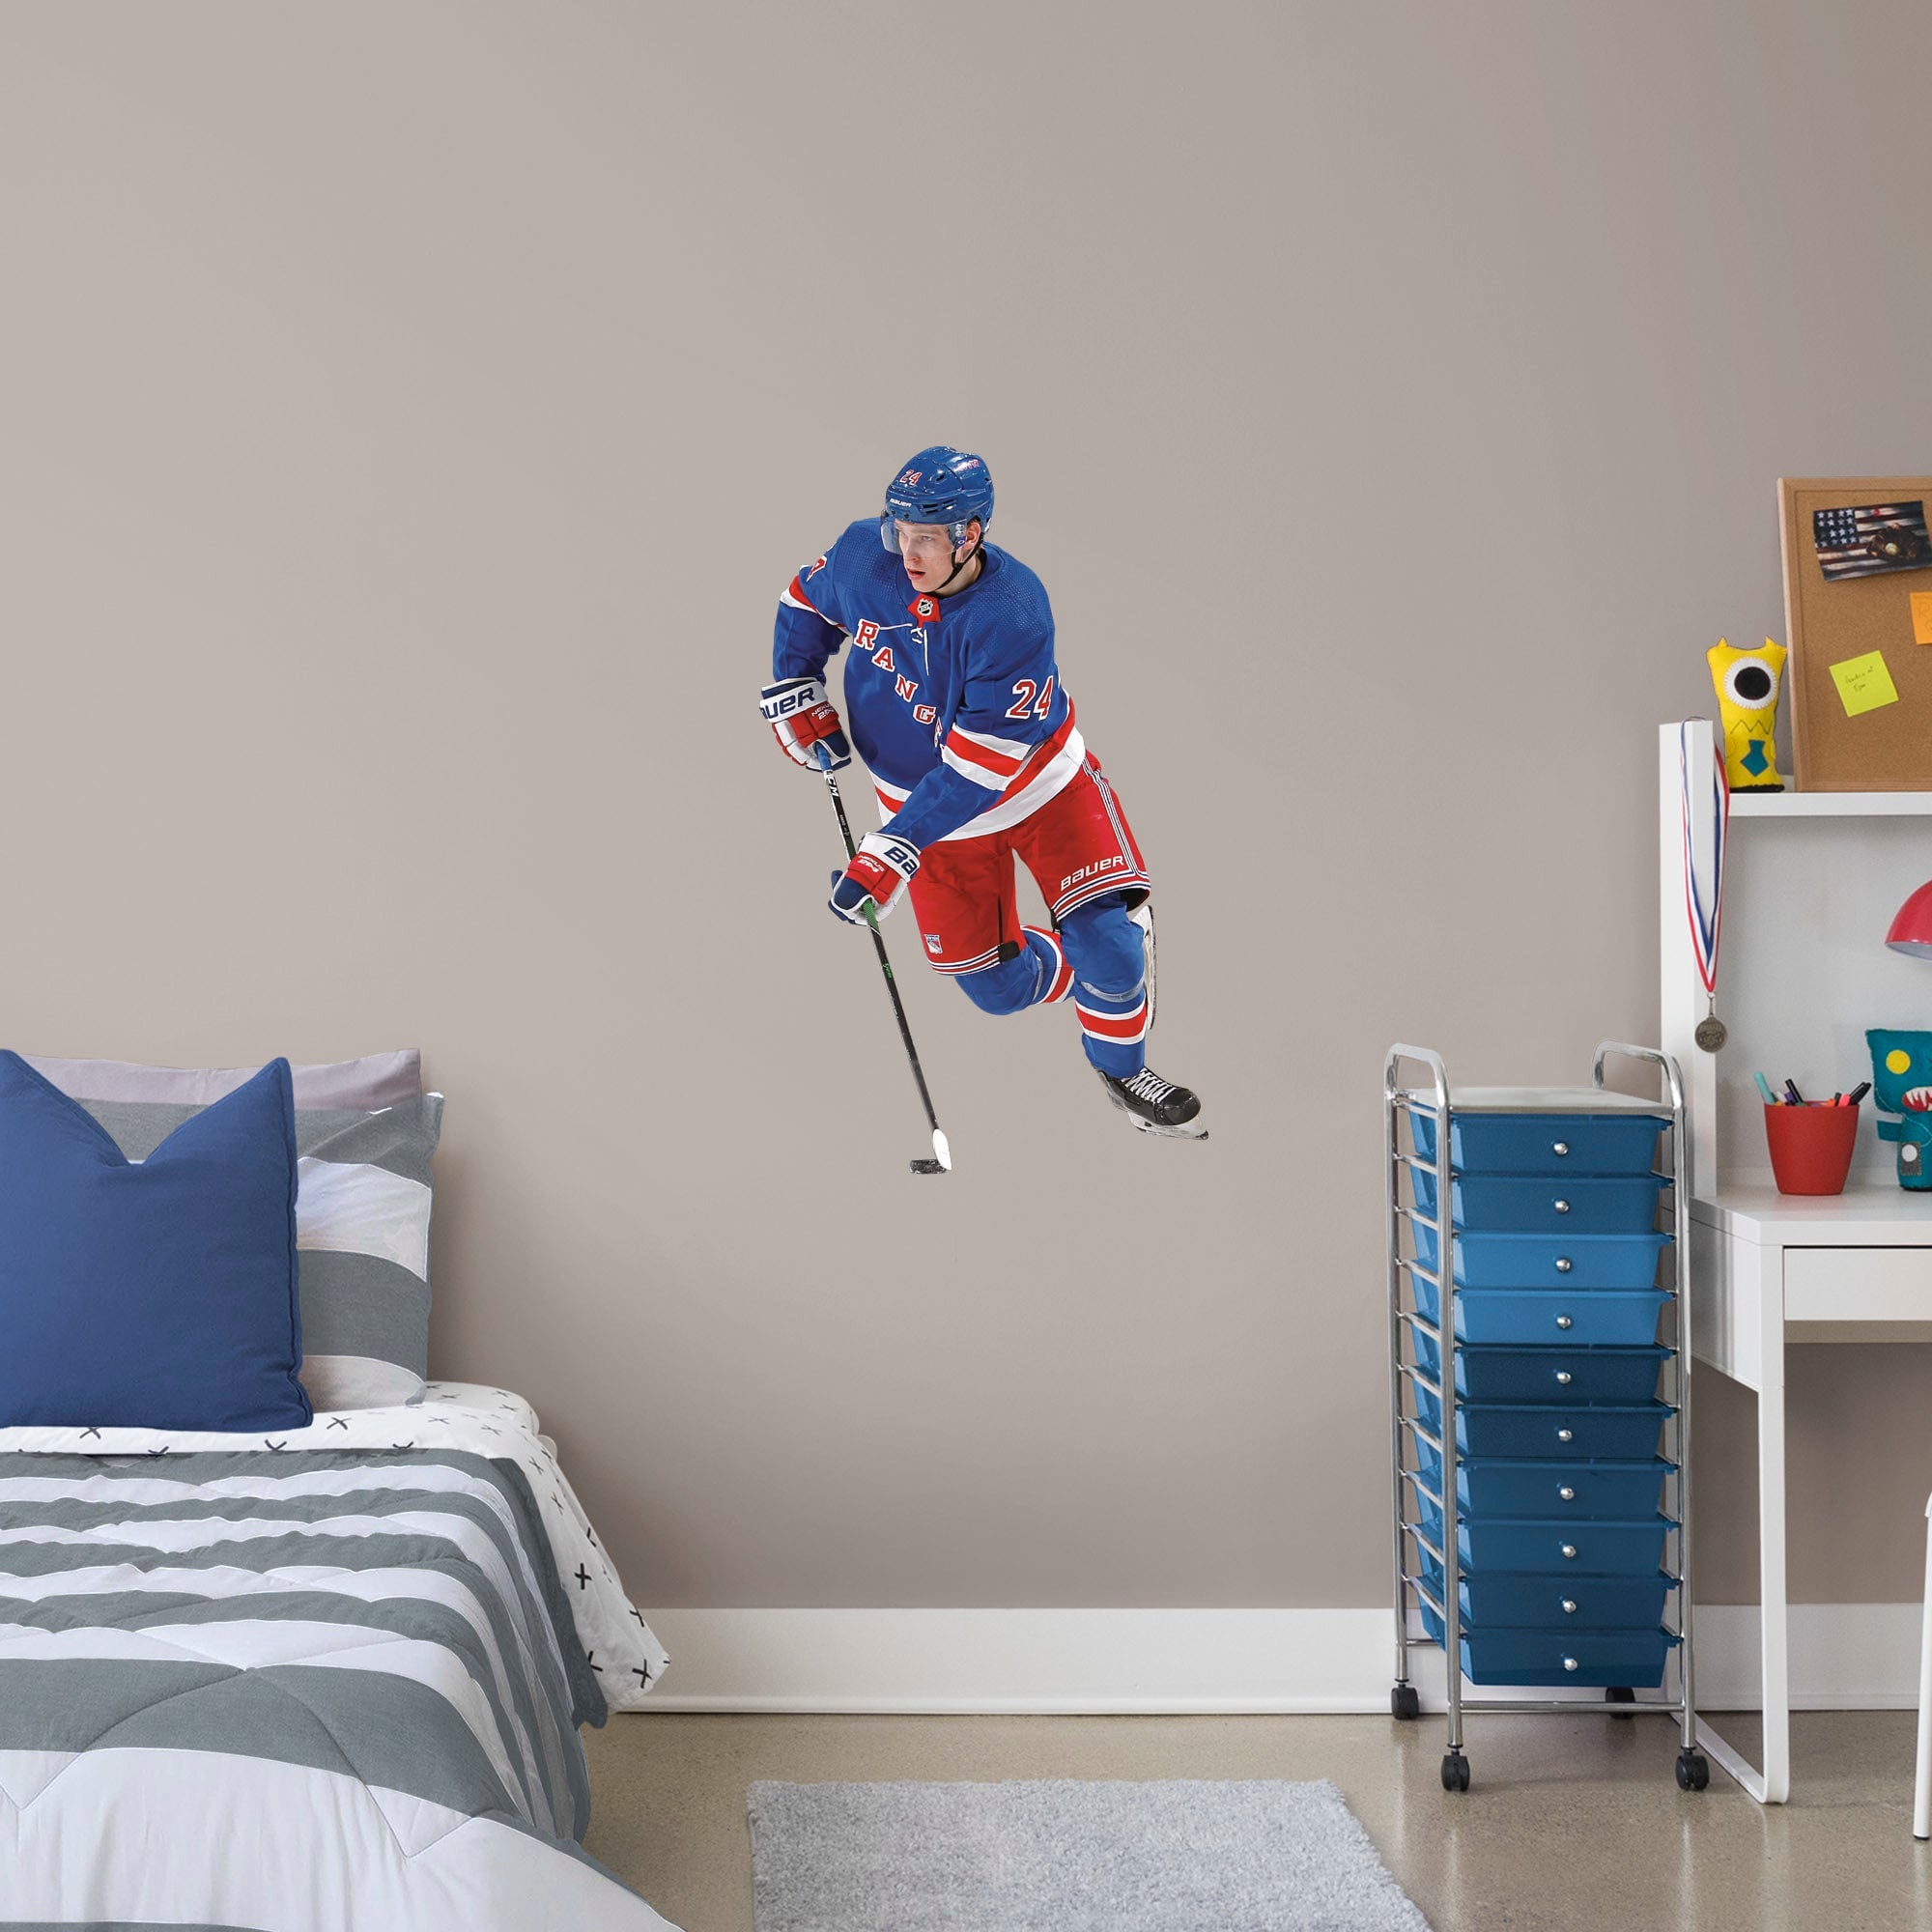 Kaapo Kakko for New York Rangers - Officially Licensed NHL Removable Wall Decal XL by Fathead | Vinyl